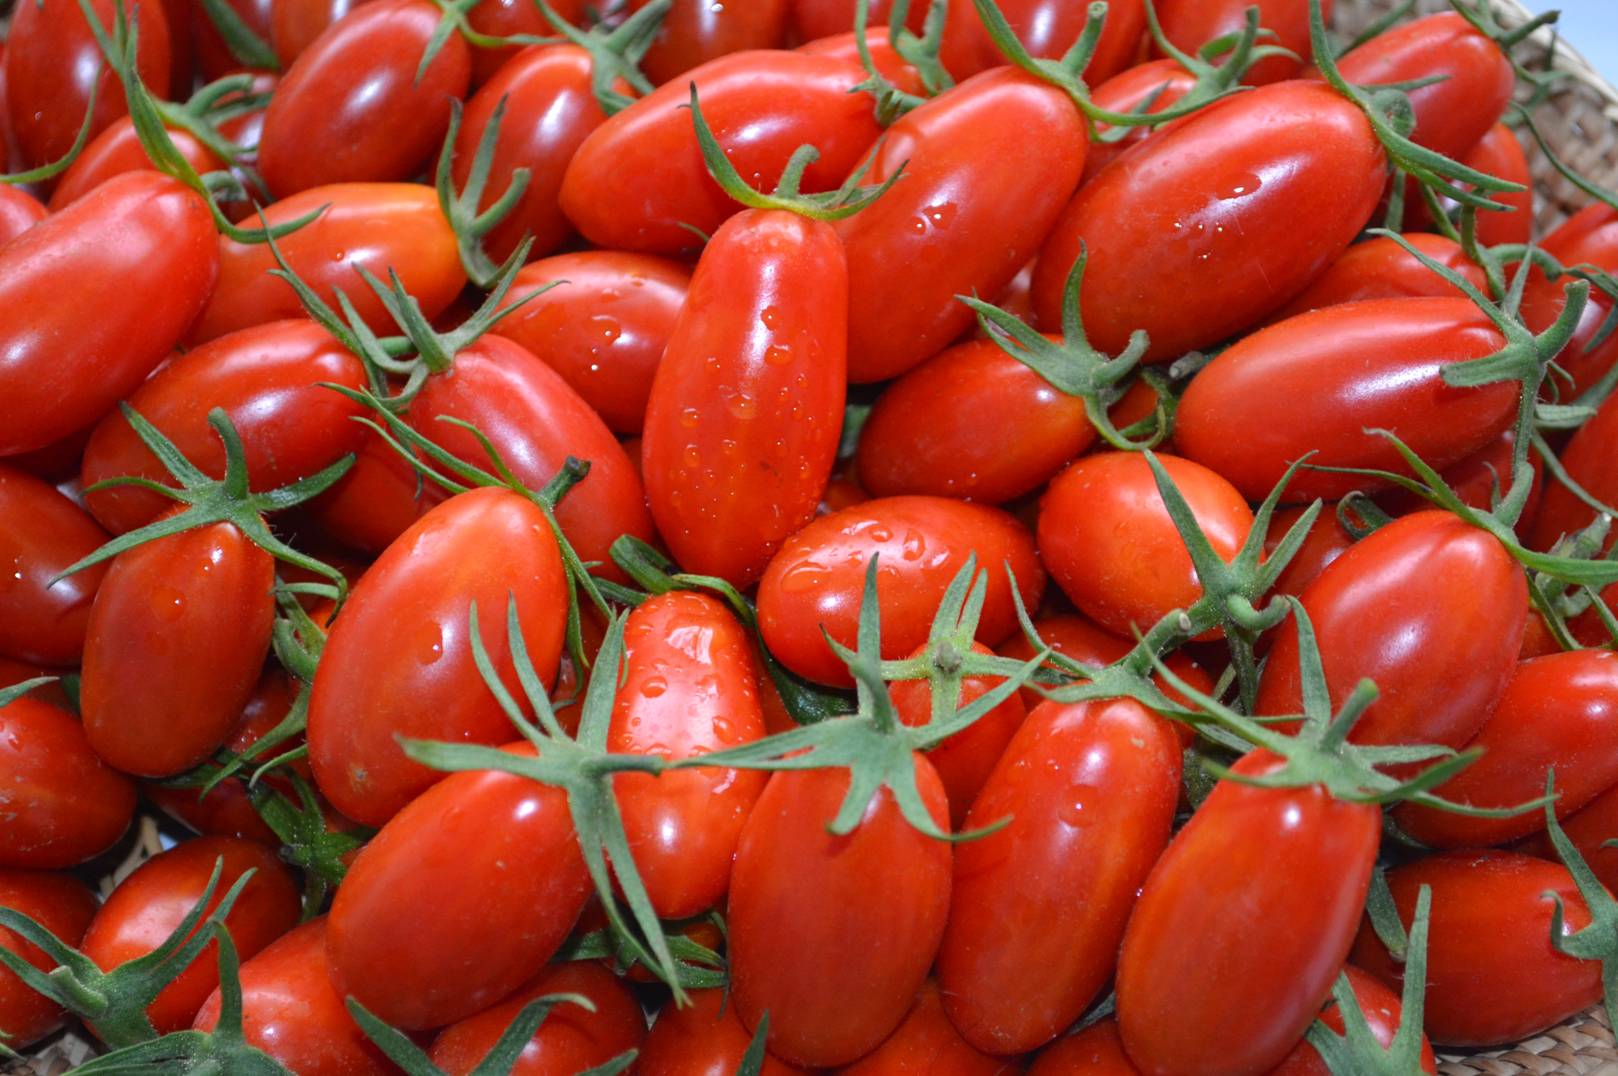 Application of carbonized rice husks improved the quality of tomato